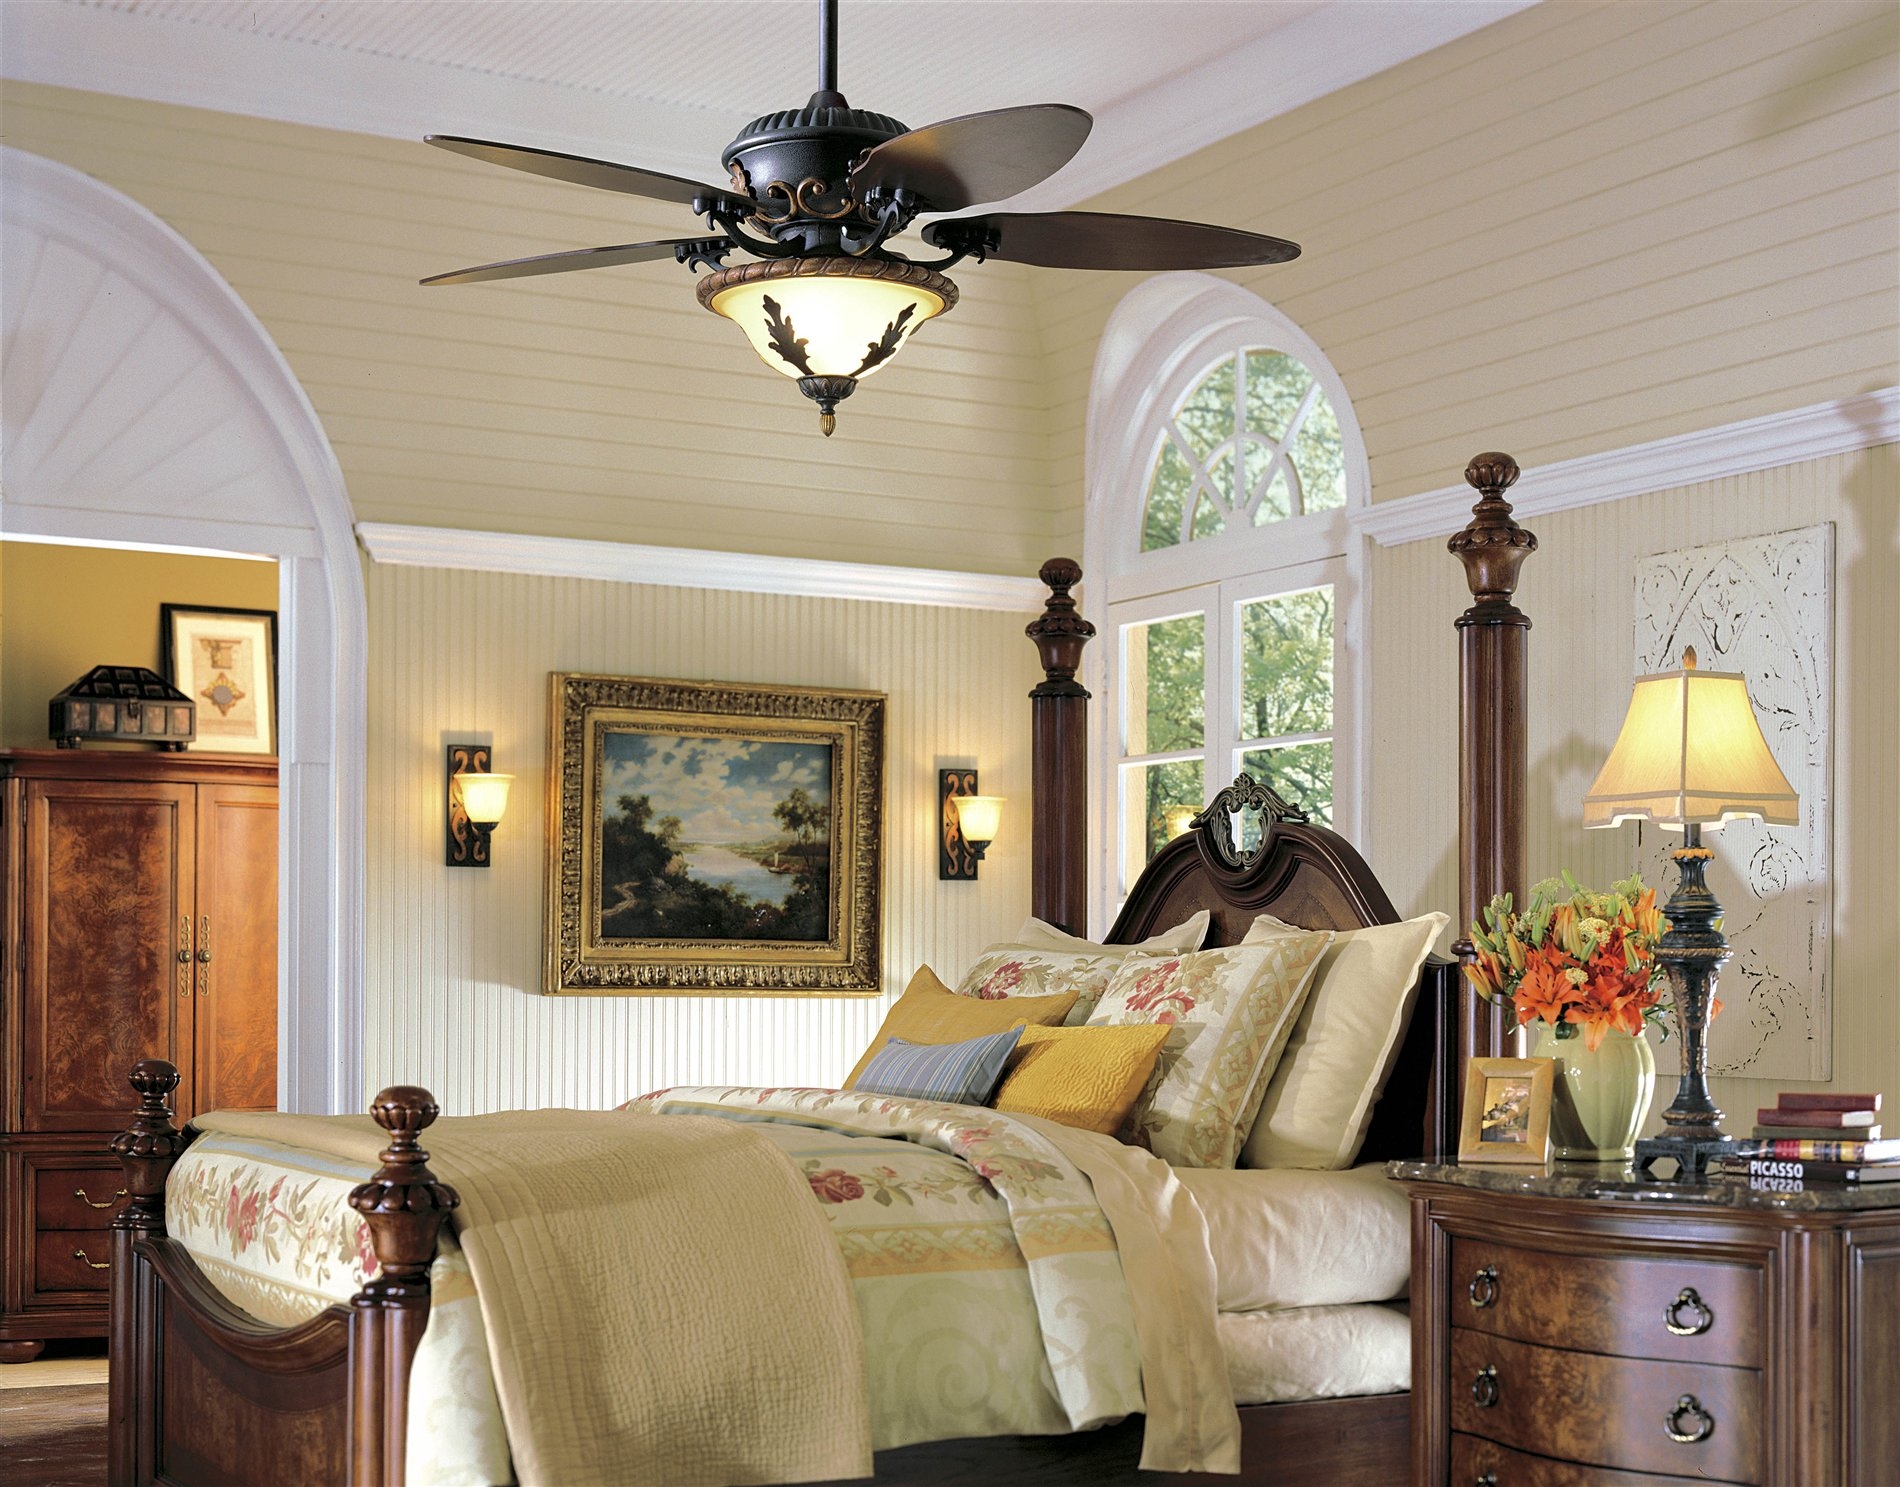 Permalink to Best Ceiling Fan With Light For Bedroom